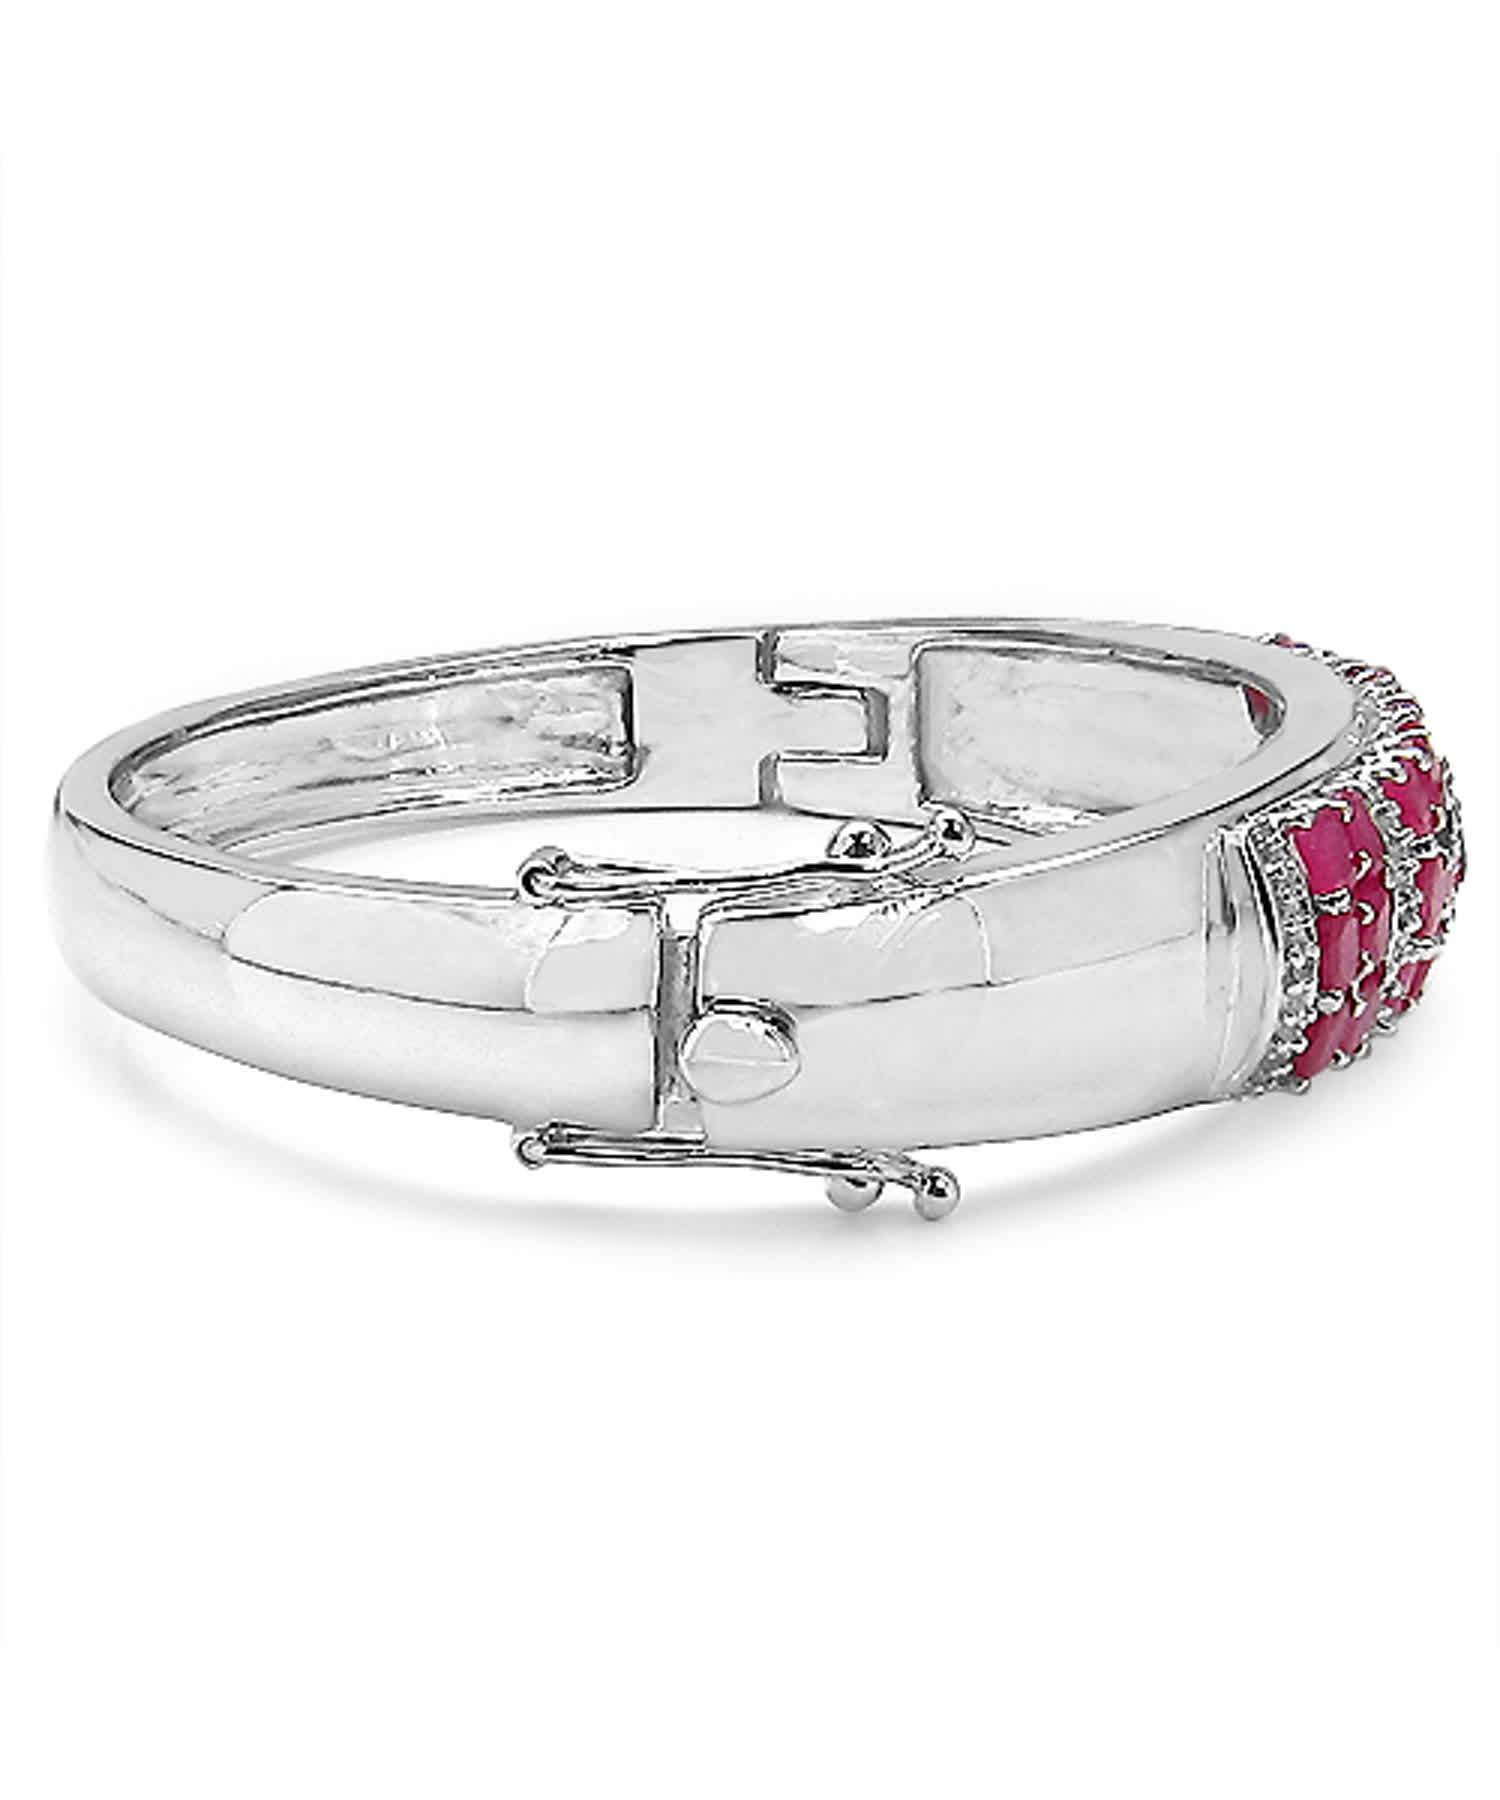 6.65ctw Natural Ruby and Topaz Rhodium Plated 925 Sterling Silver Bangle Bracelet View 3